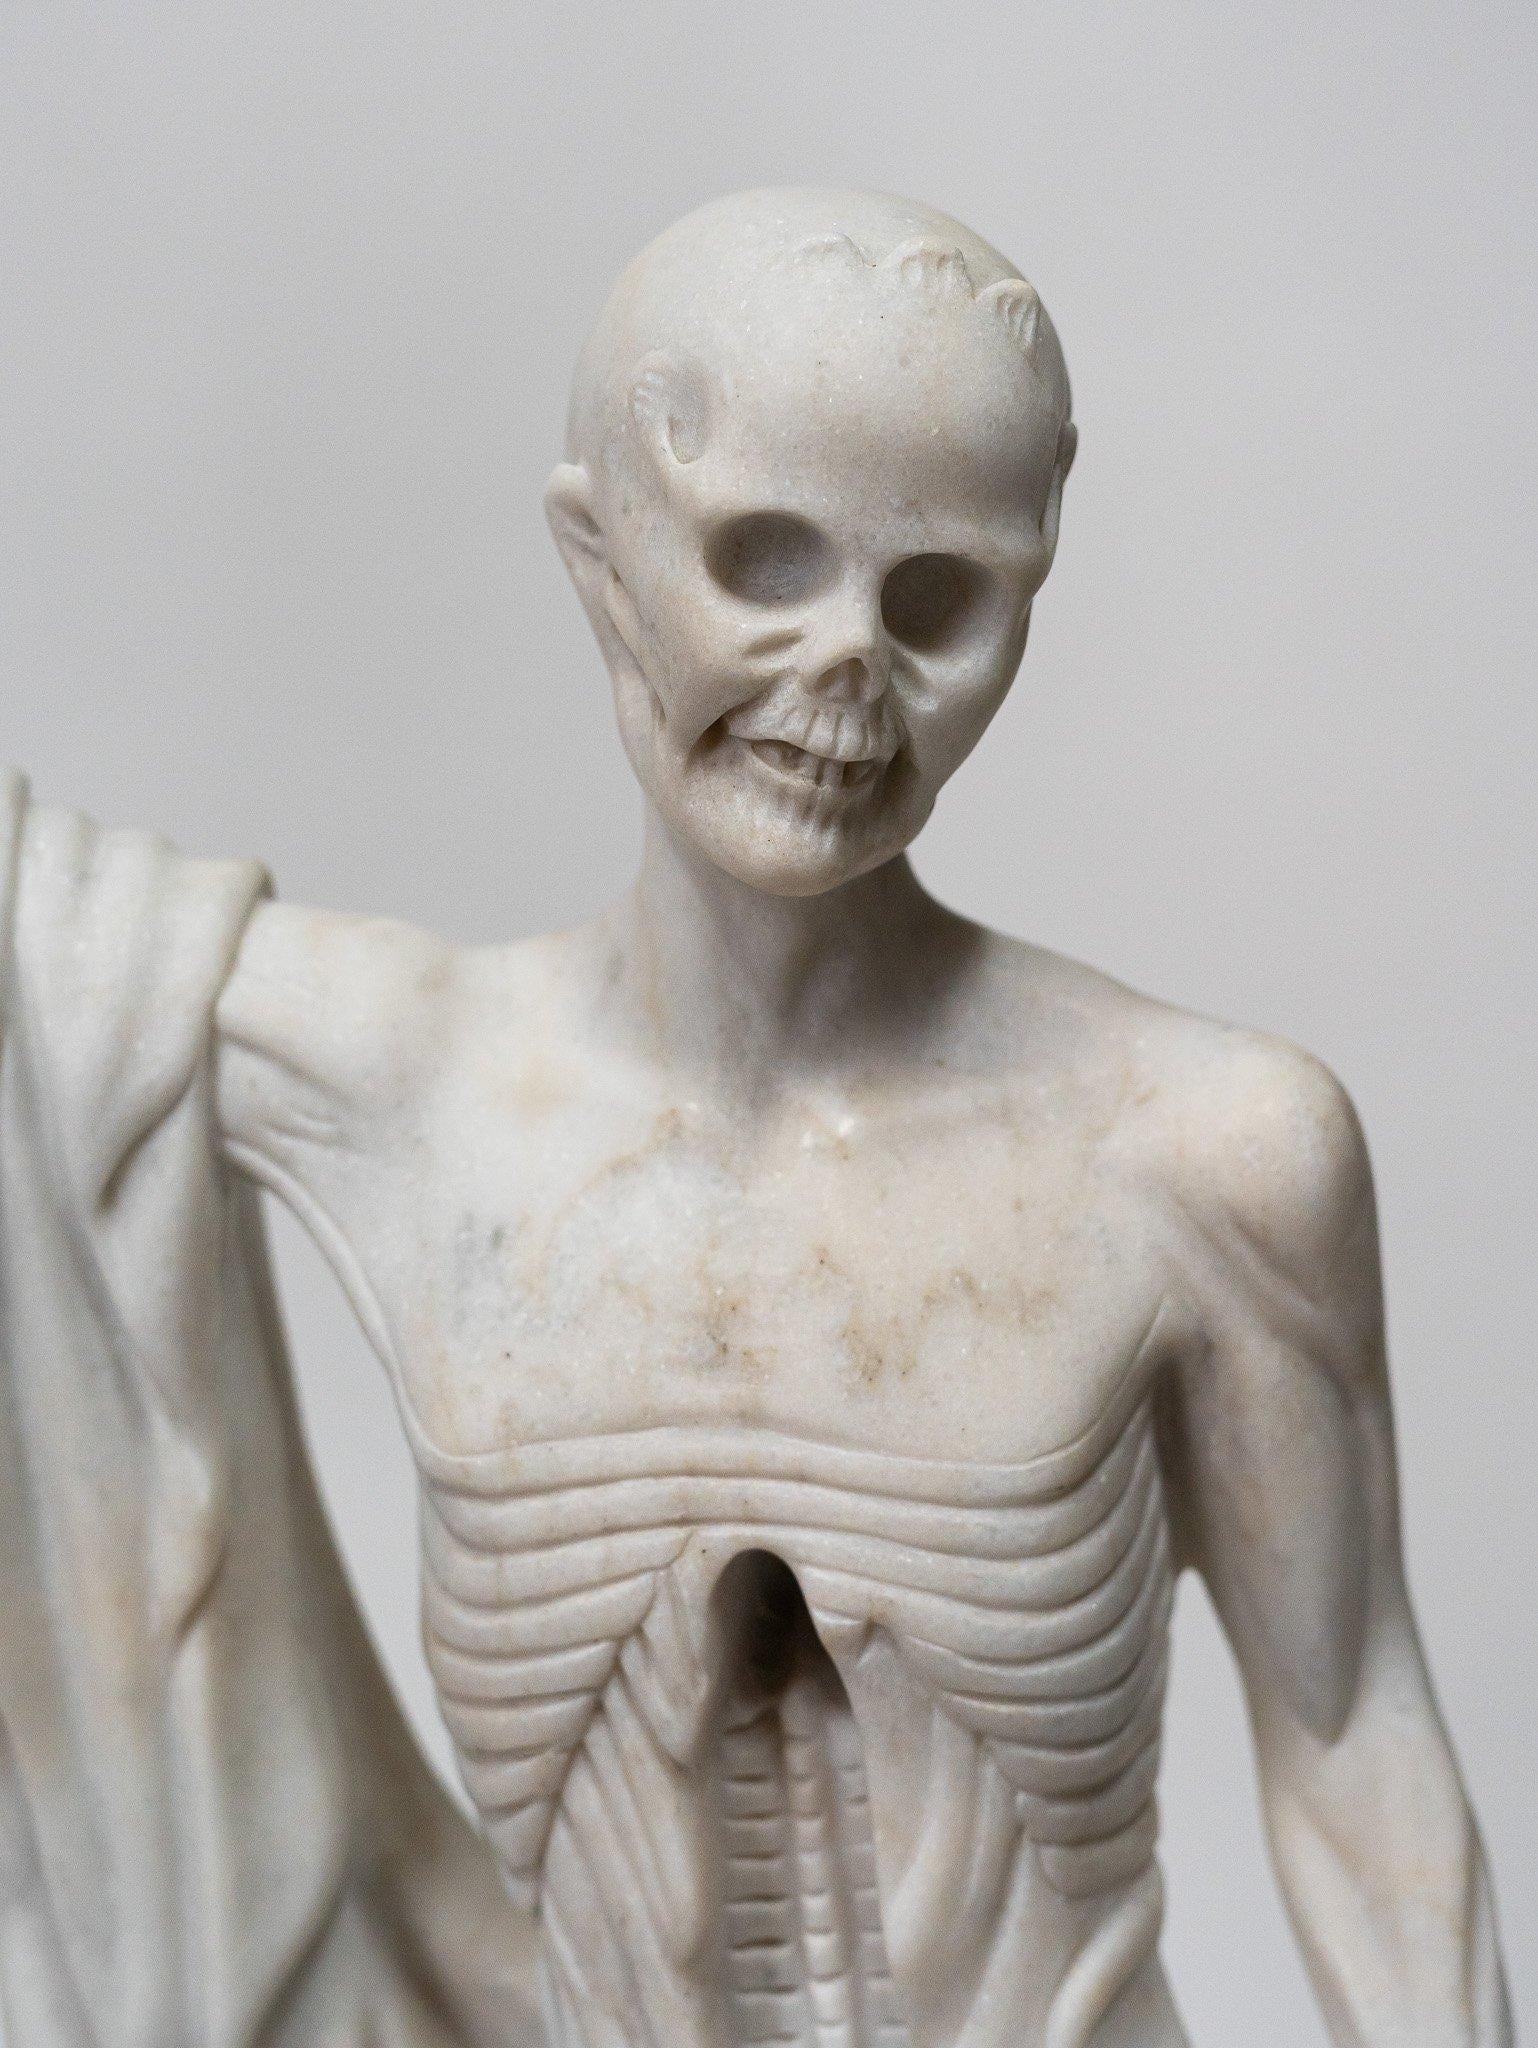 anatomical sculpture in marble.